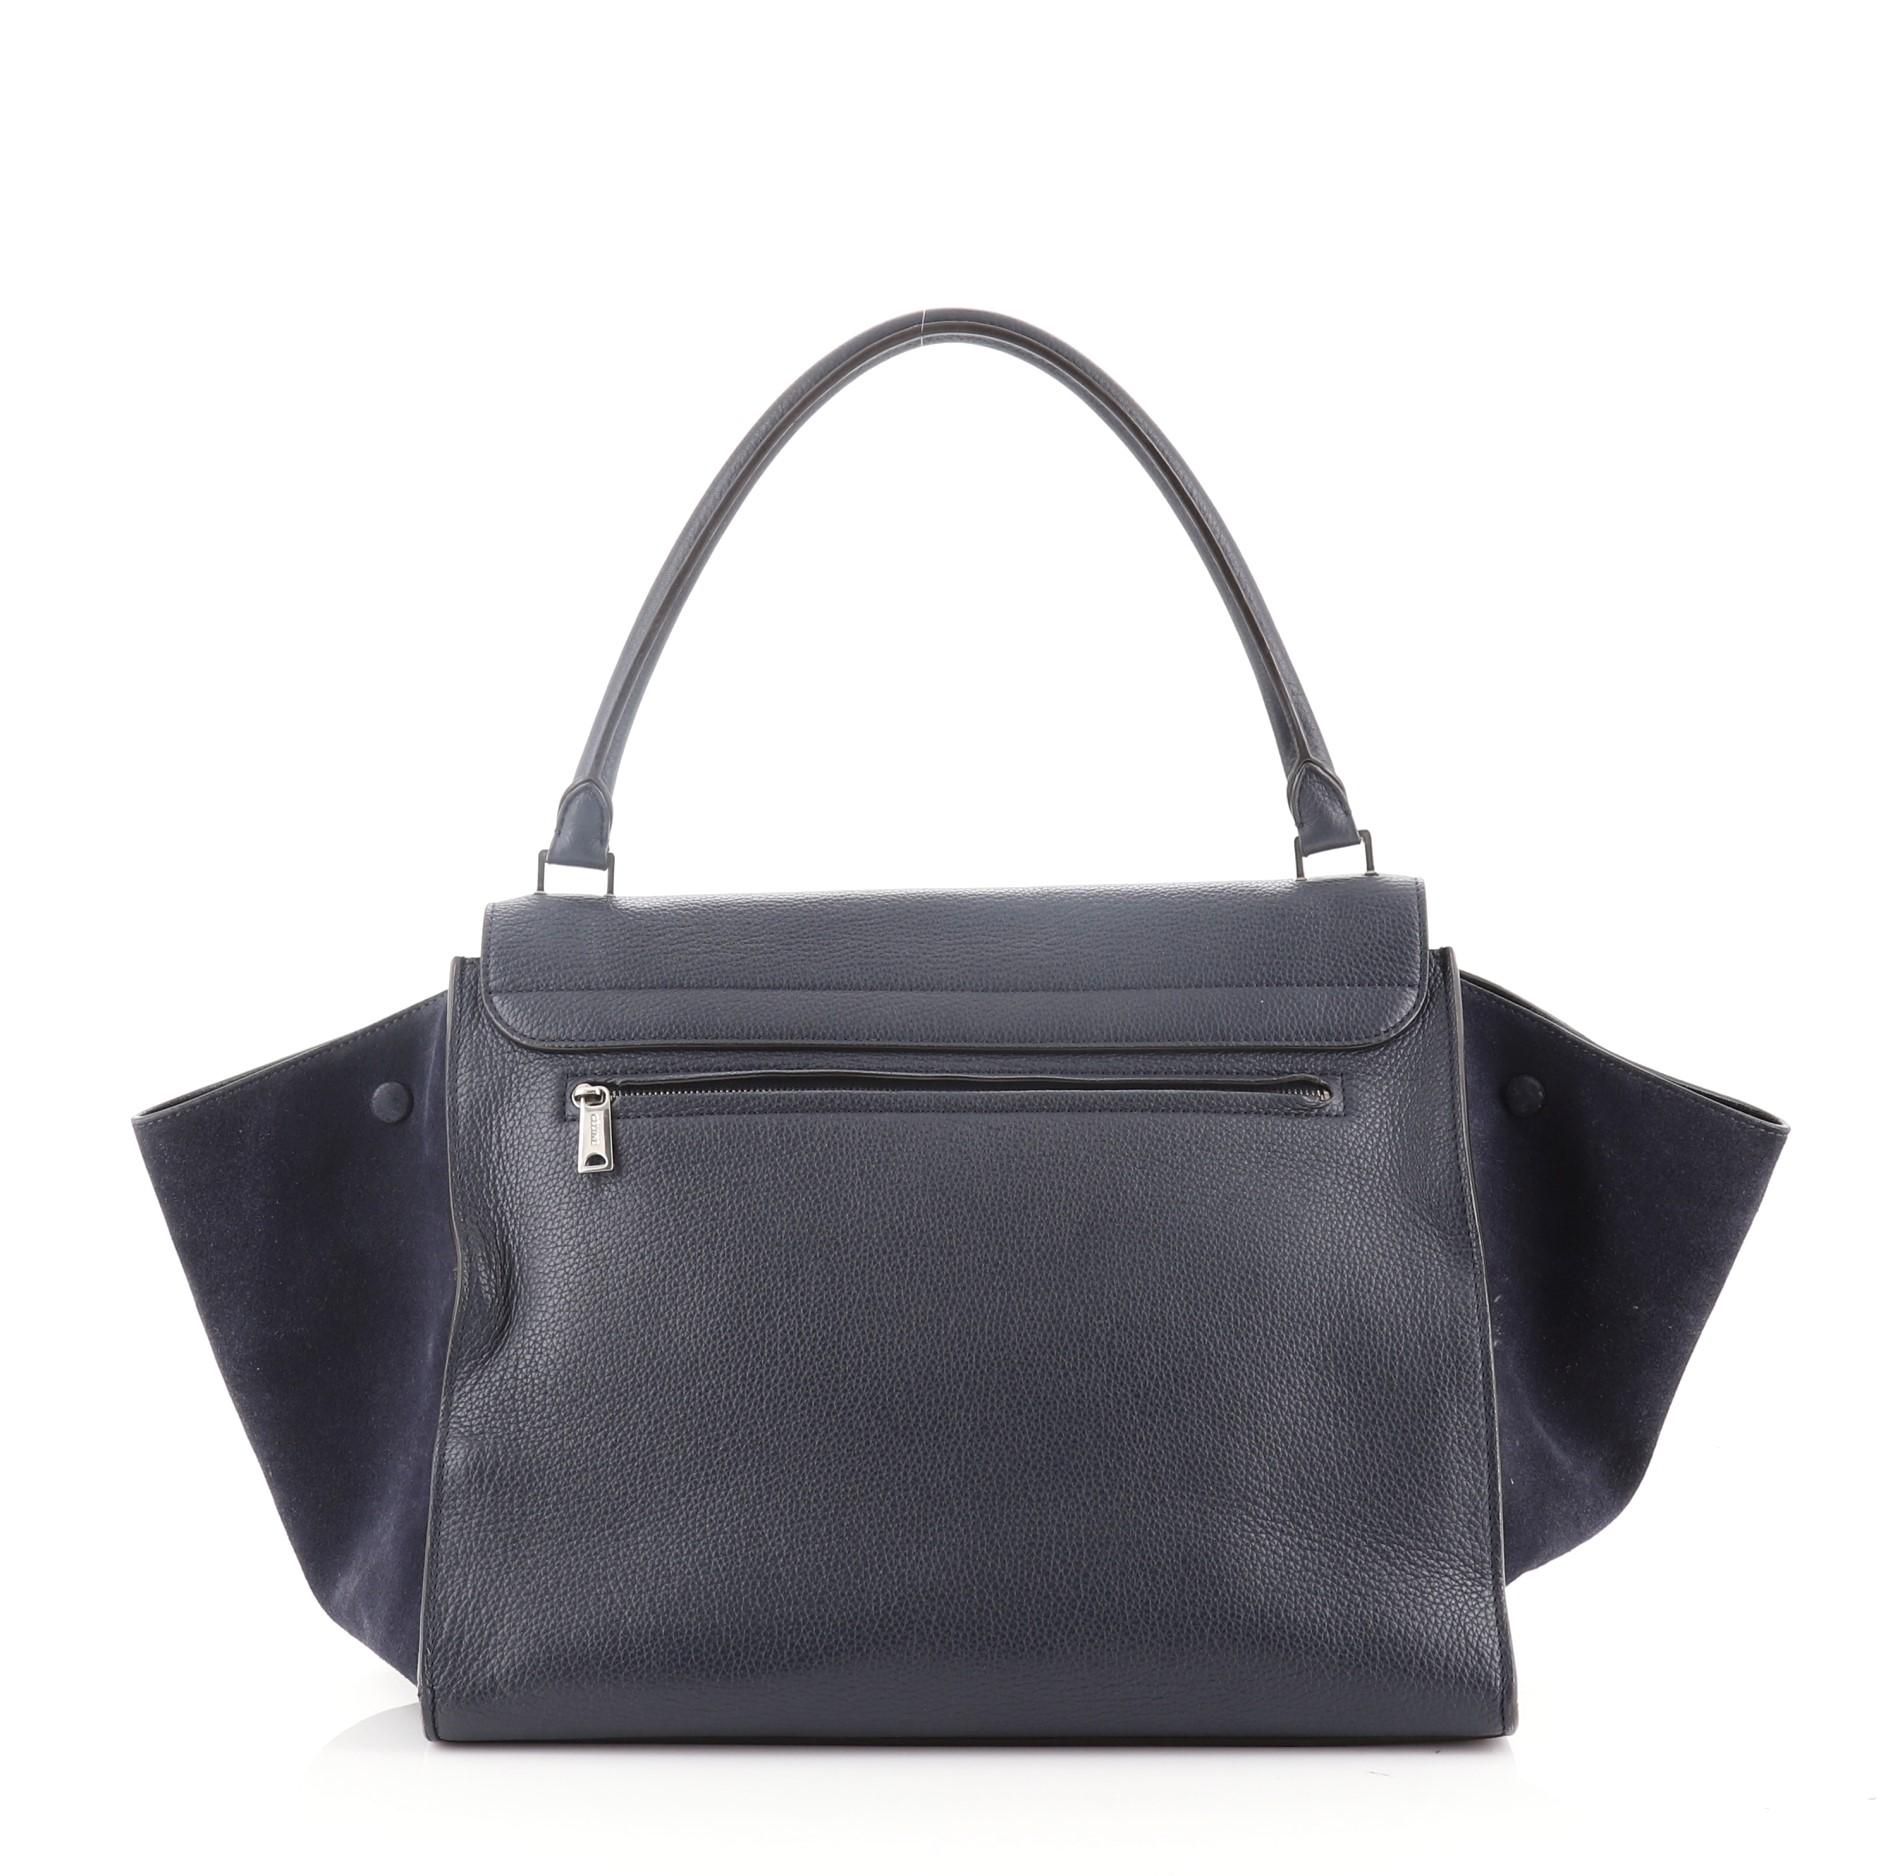 Celine Trapeze Bag Leather Large
Blue Leather

Condition Details: Moderate creasing, scuffs and wear on exterior and underneath flap, cracking on exterior and opening wax edges. Scuffs, wear and small indentations in interior, scratches and tarnish